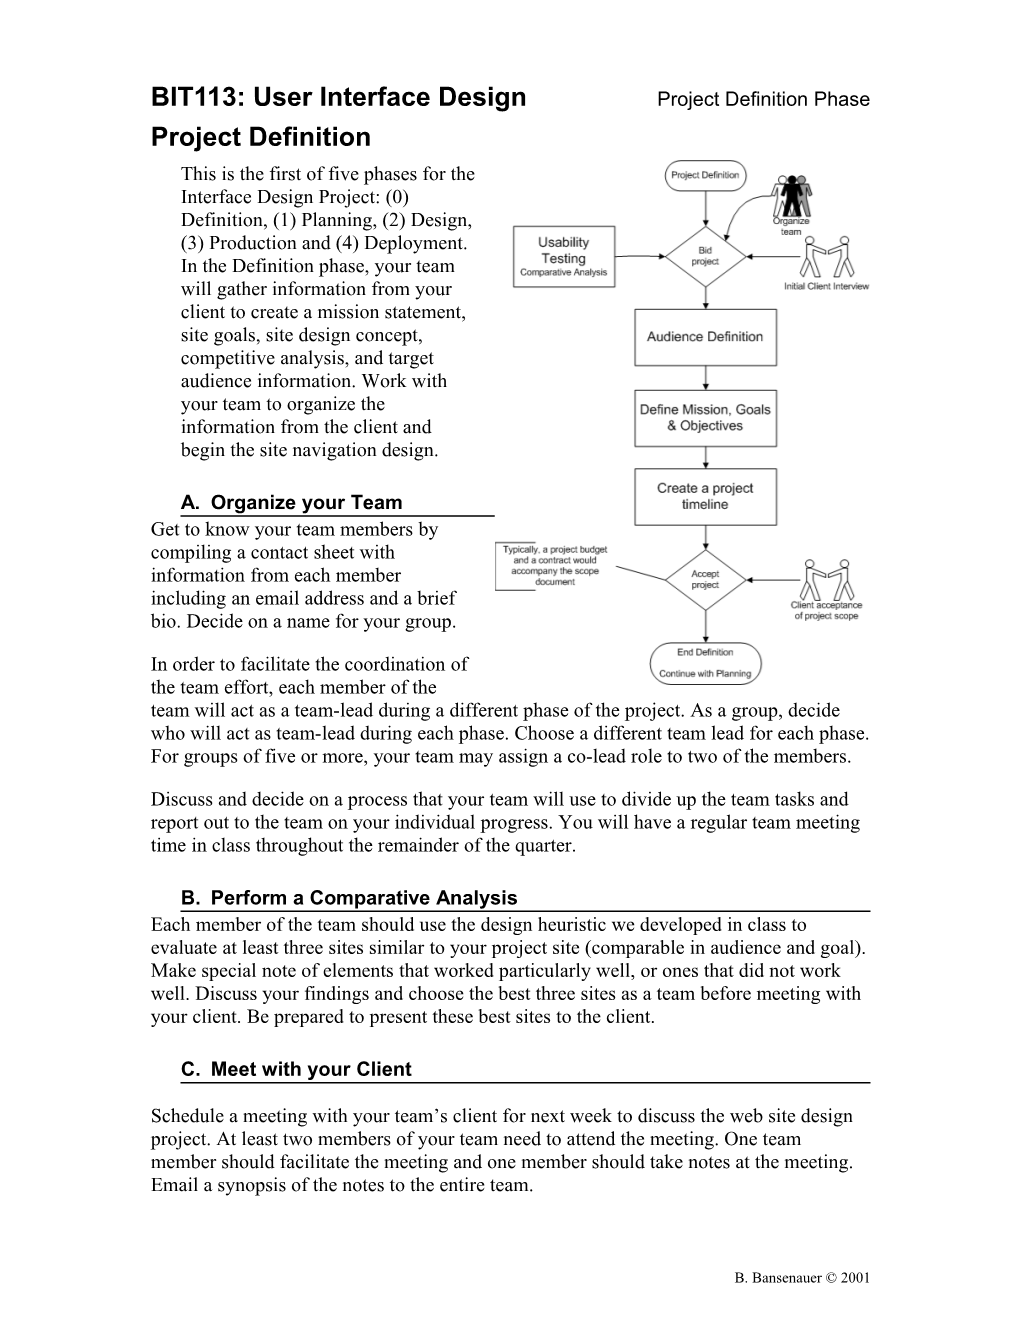 The Information Architecture Plan